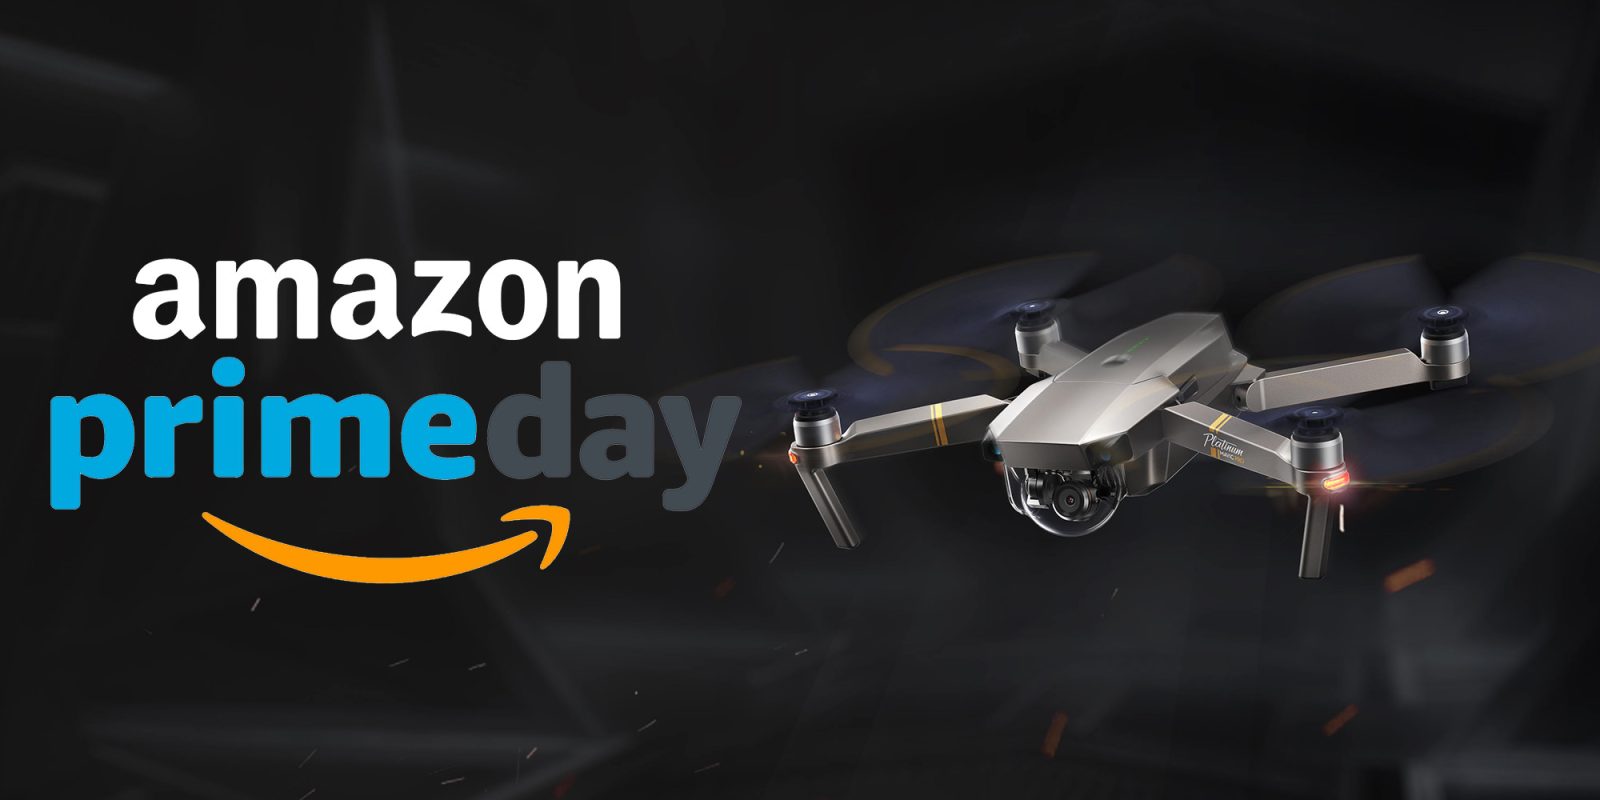 DJI lowers prices on Spark and Mavic Pro drones during Amazon Prime Day on July 16th 2018